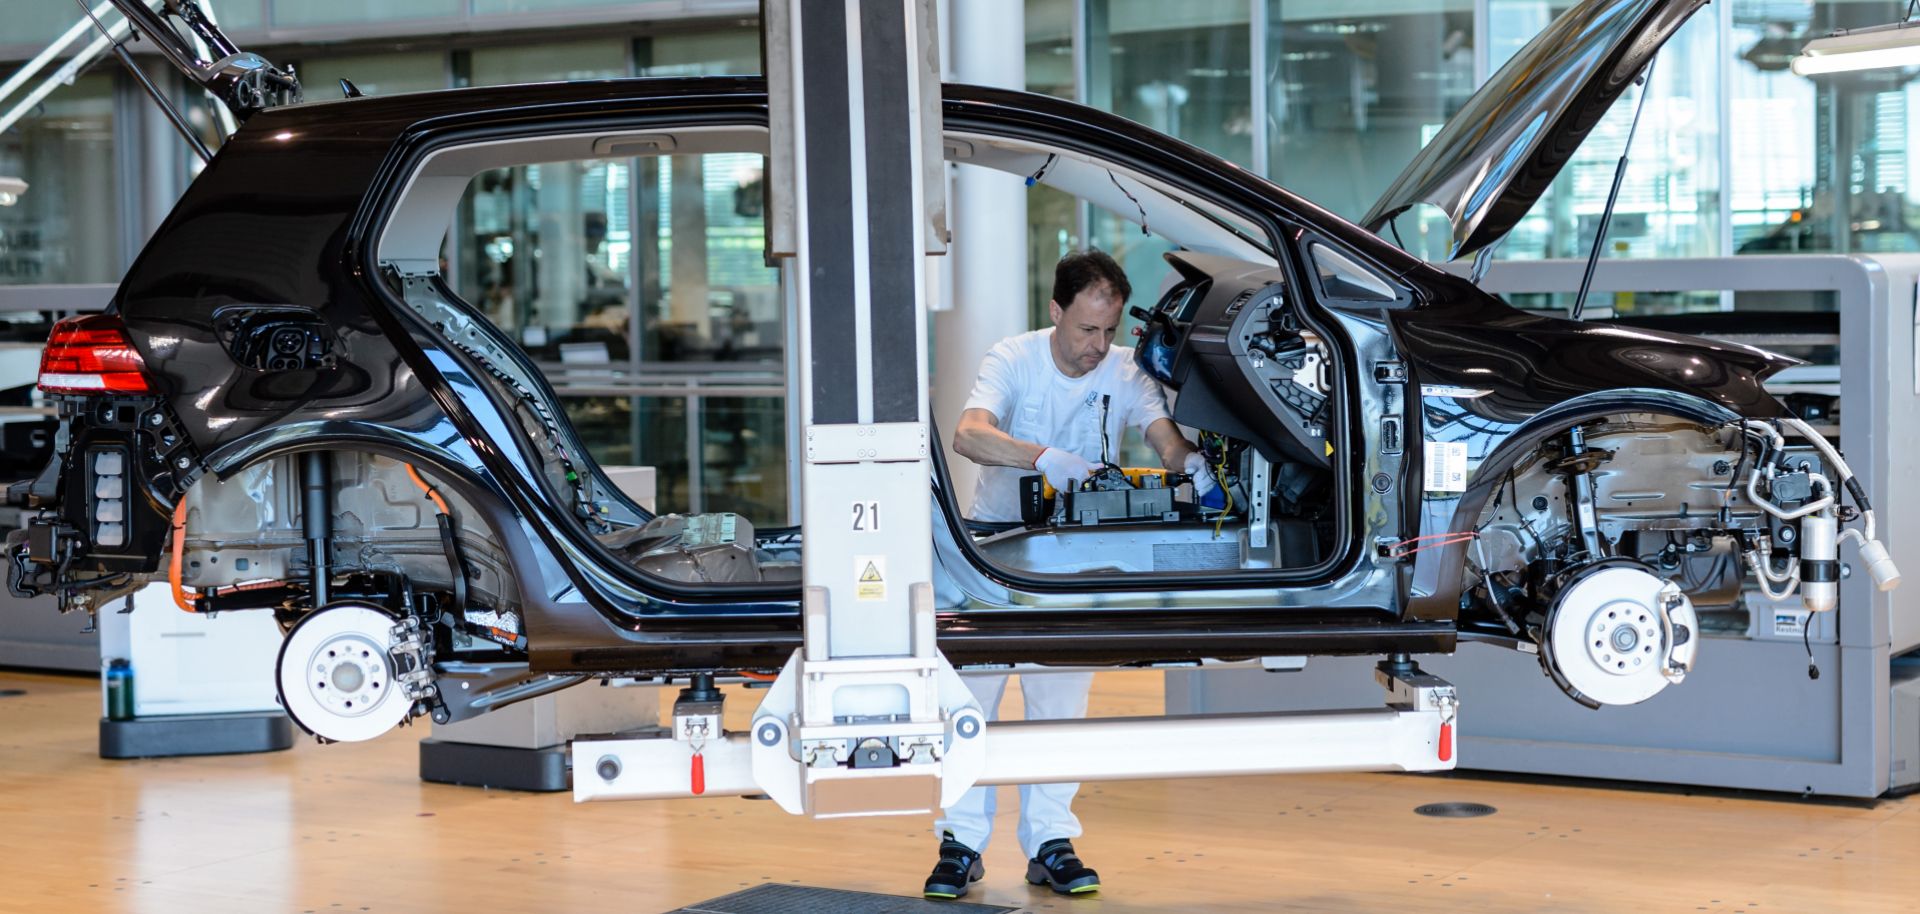 An employee works on a Volkswagen e-Golf electric automobile on the assembly line inside a factory on May 8 in Dresden, Germany.